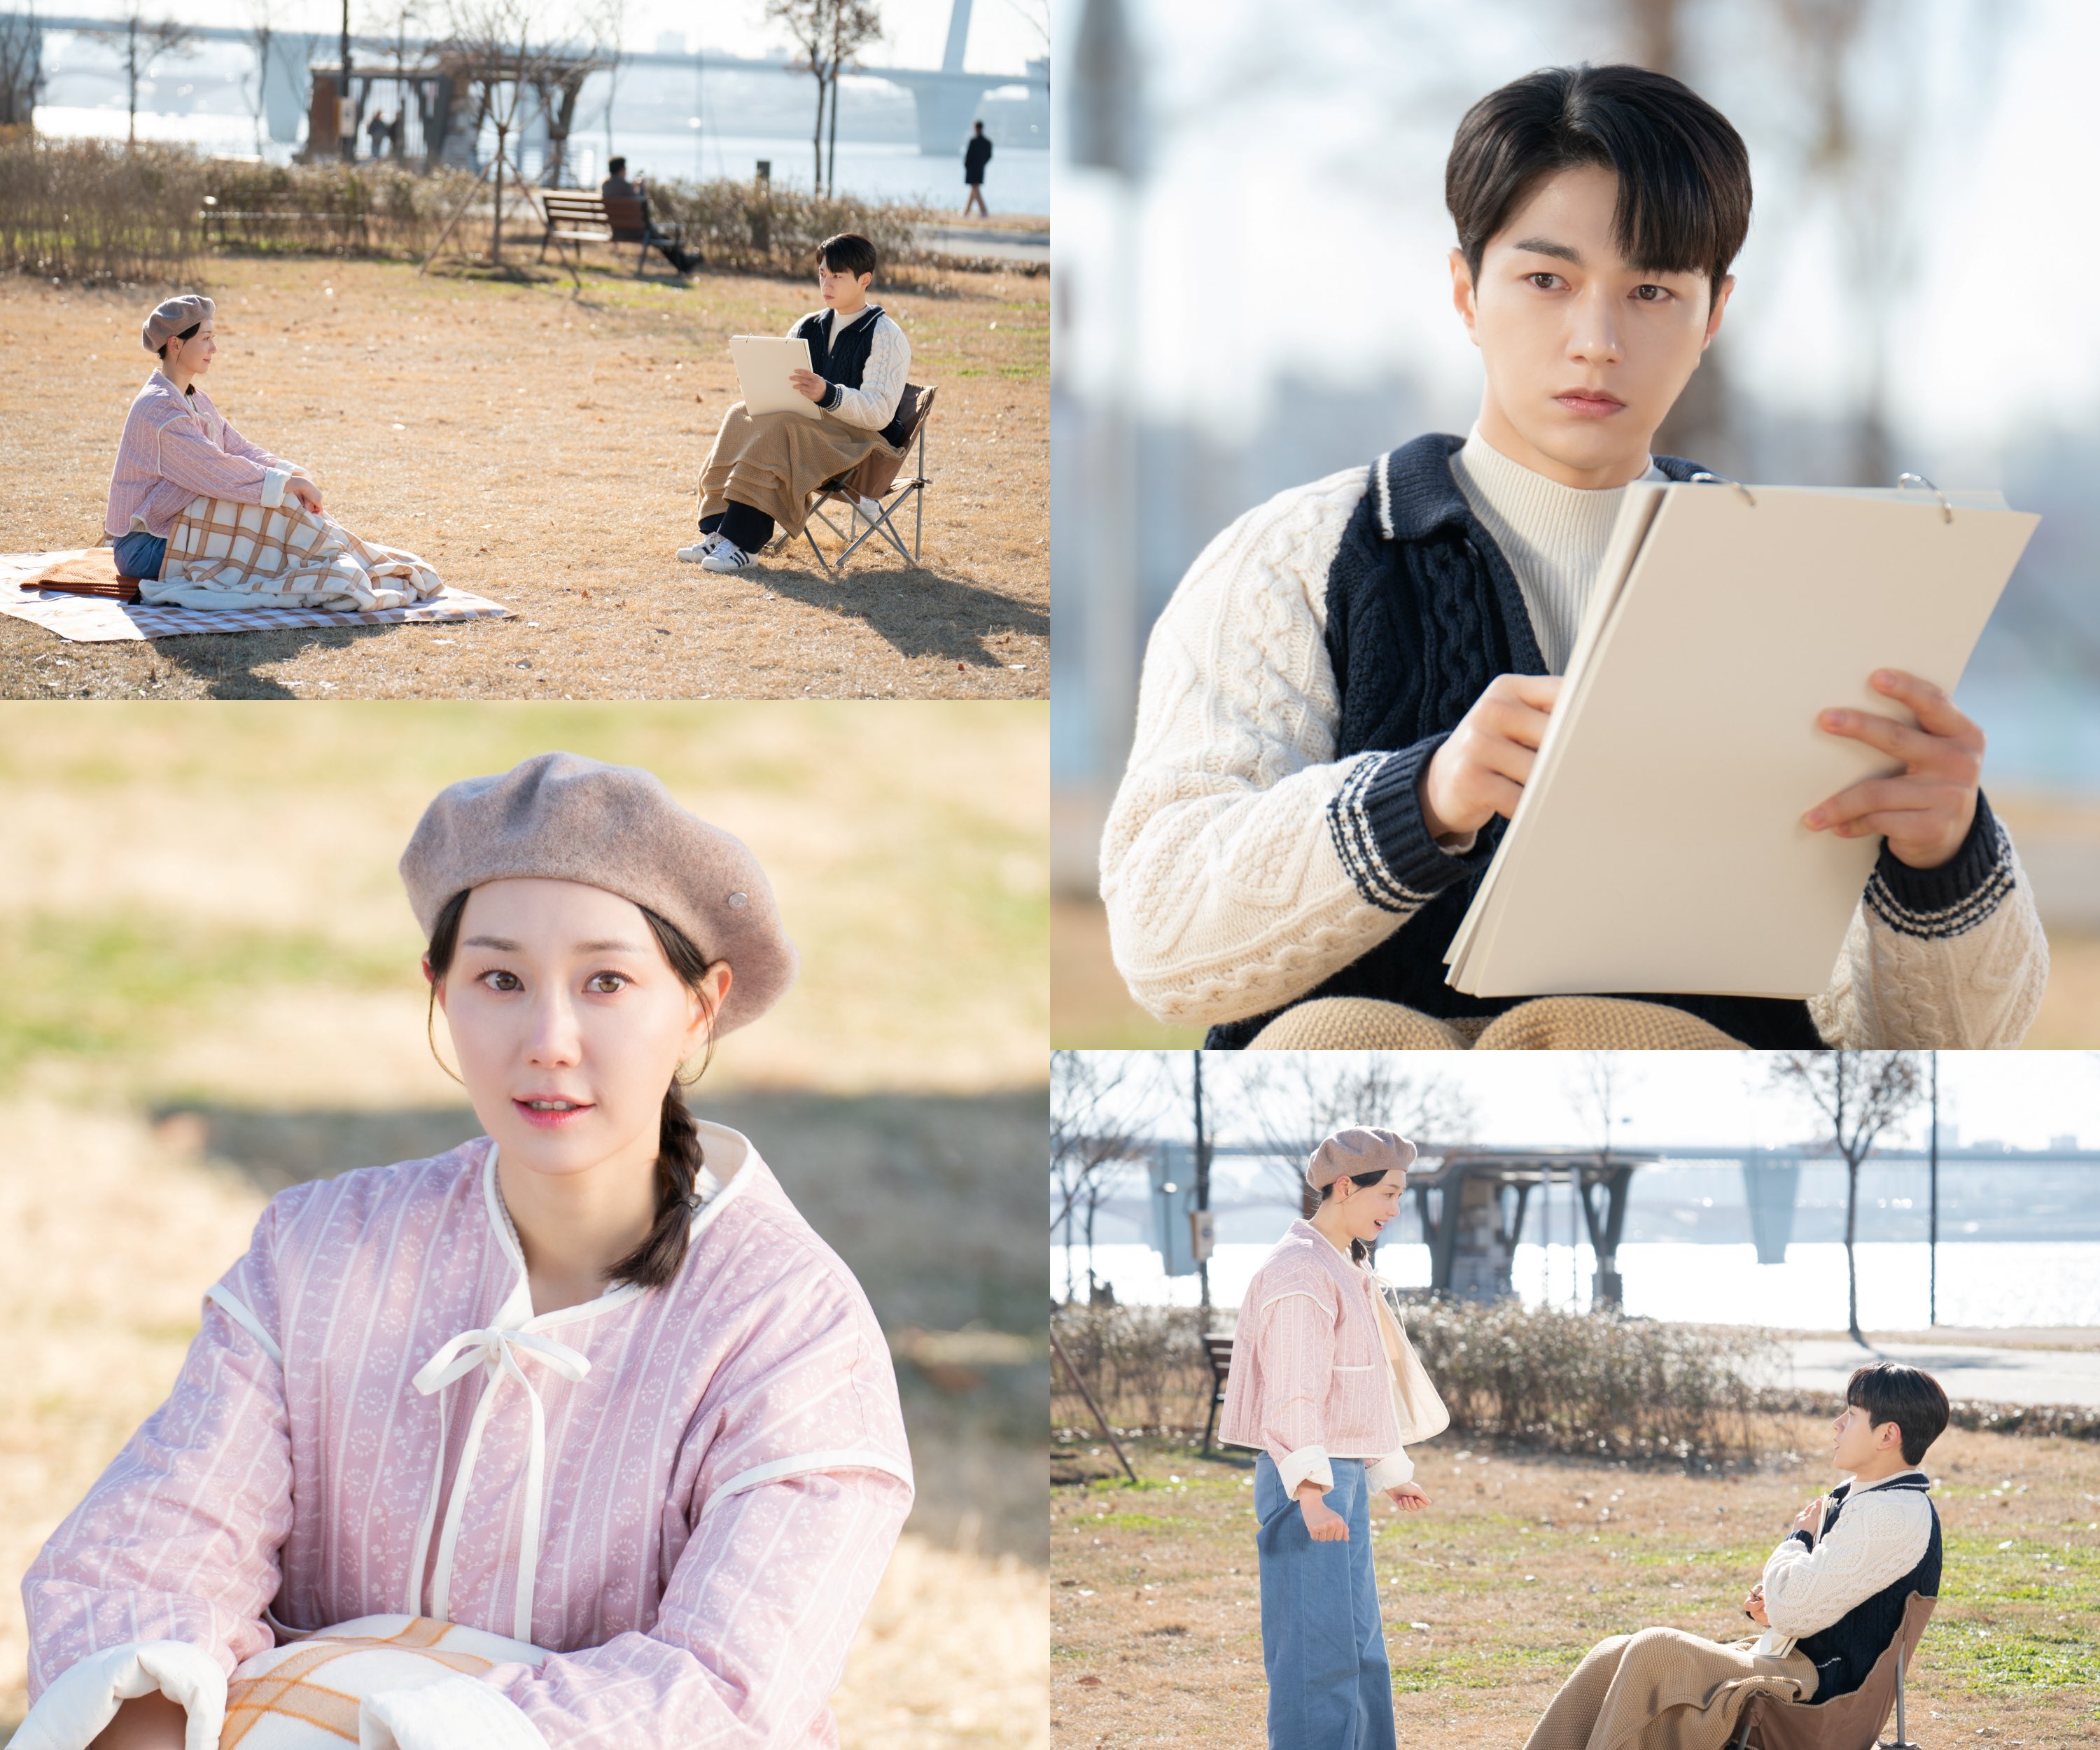 Lee Yoo Young And Kim Myung Soo Enjoy A Heart-Fluttering Outdoor Date In 